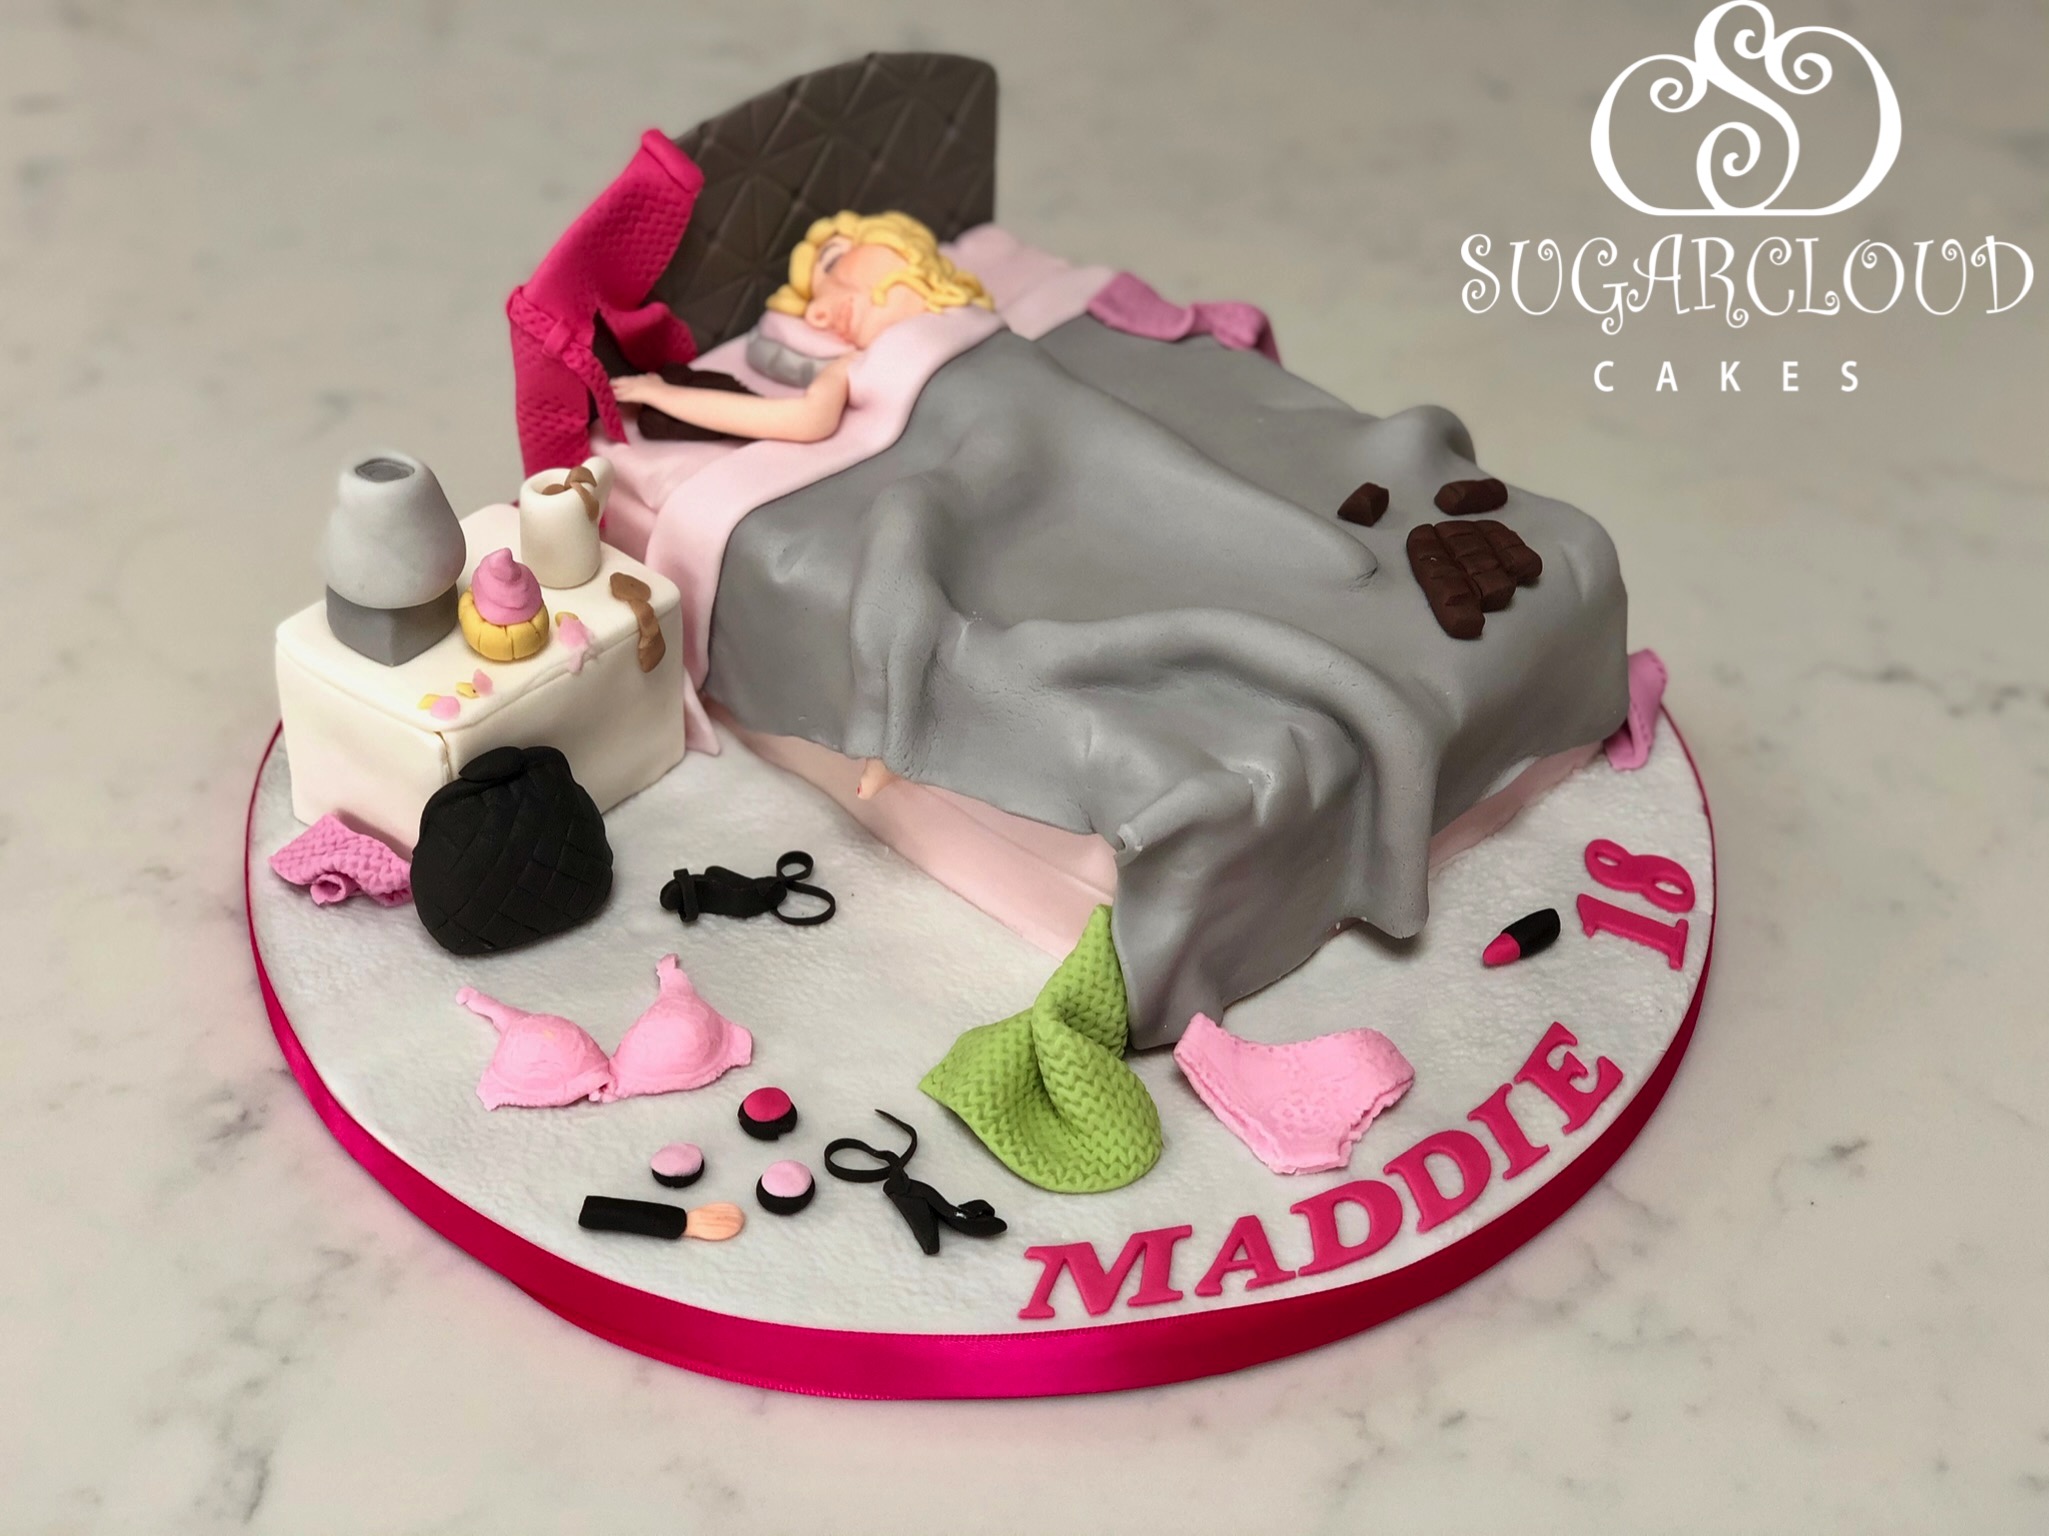 A Messy Bedroom Cake for Maddie's 18th Birthday, Nantwich